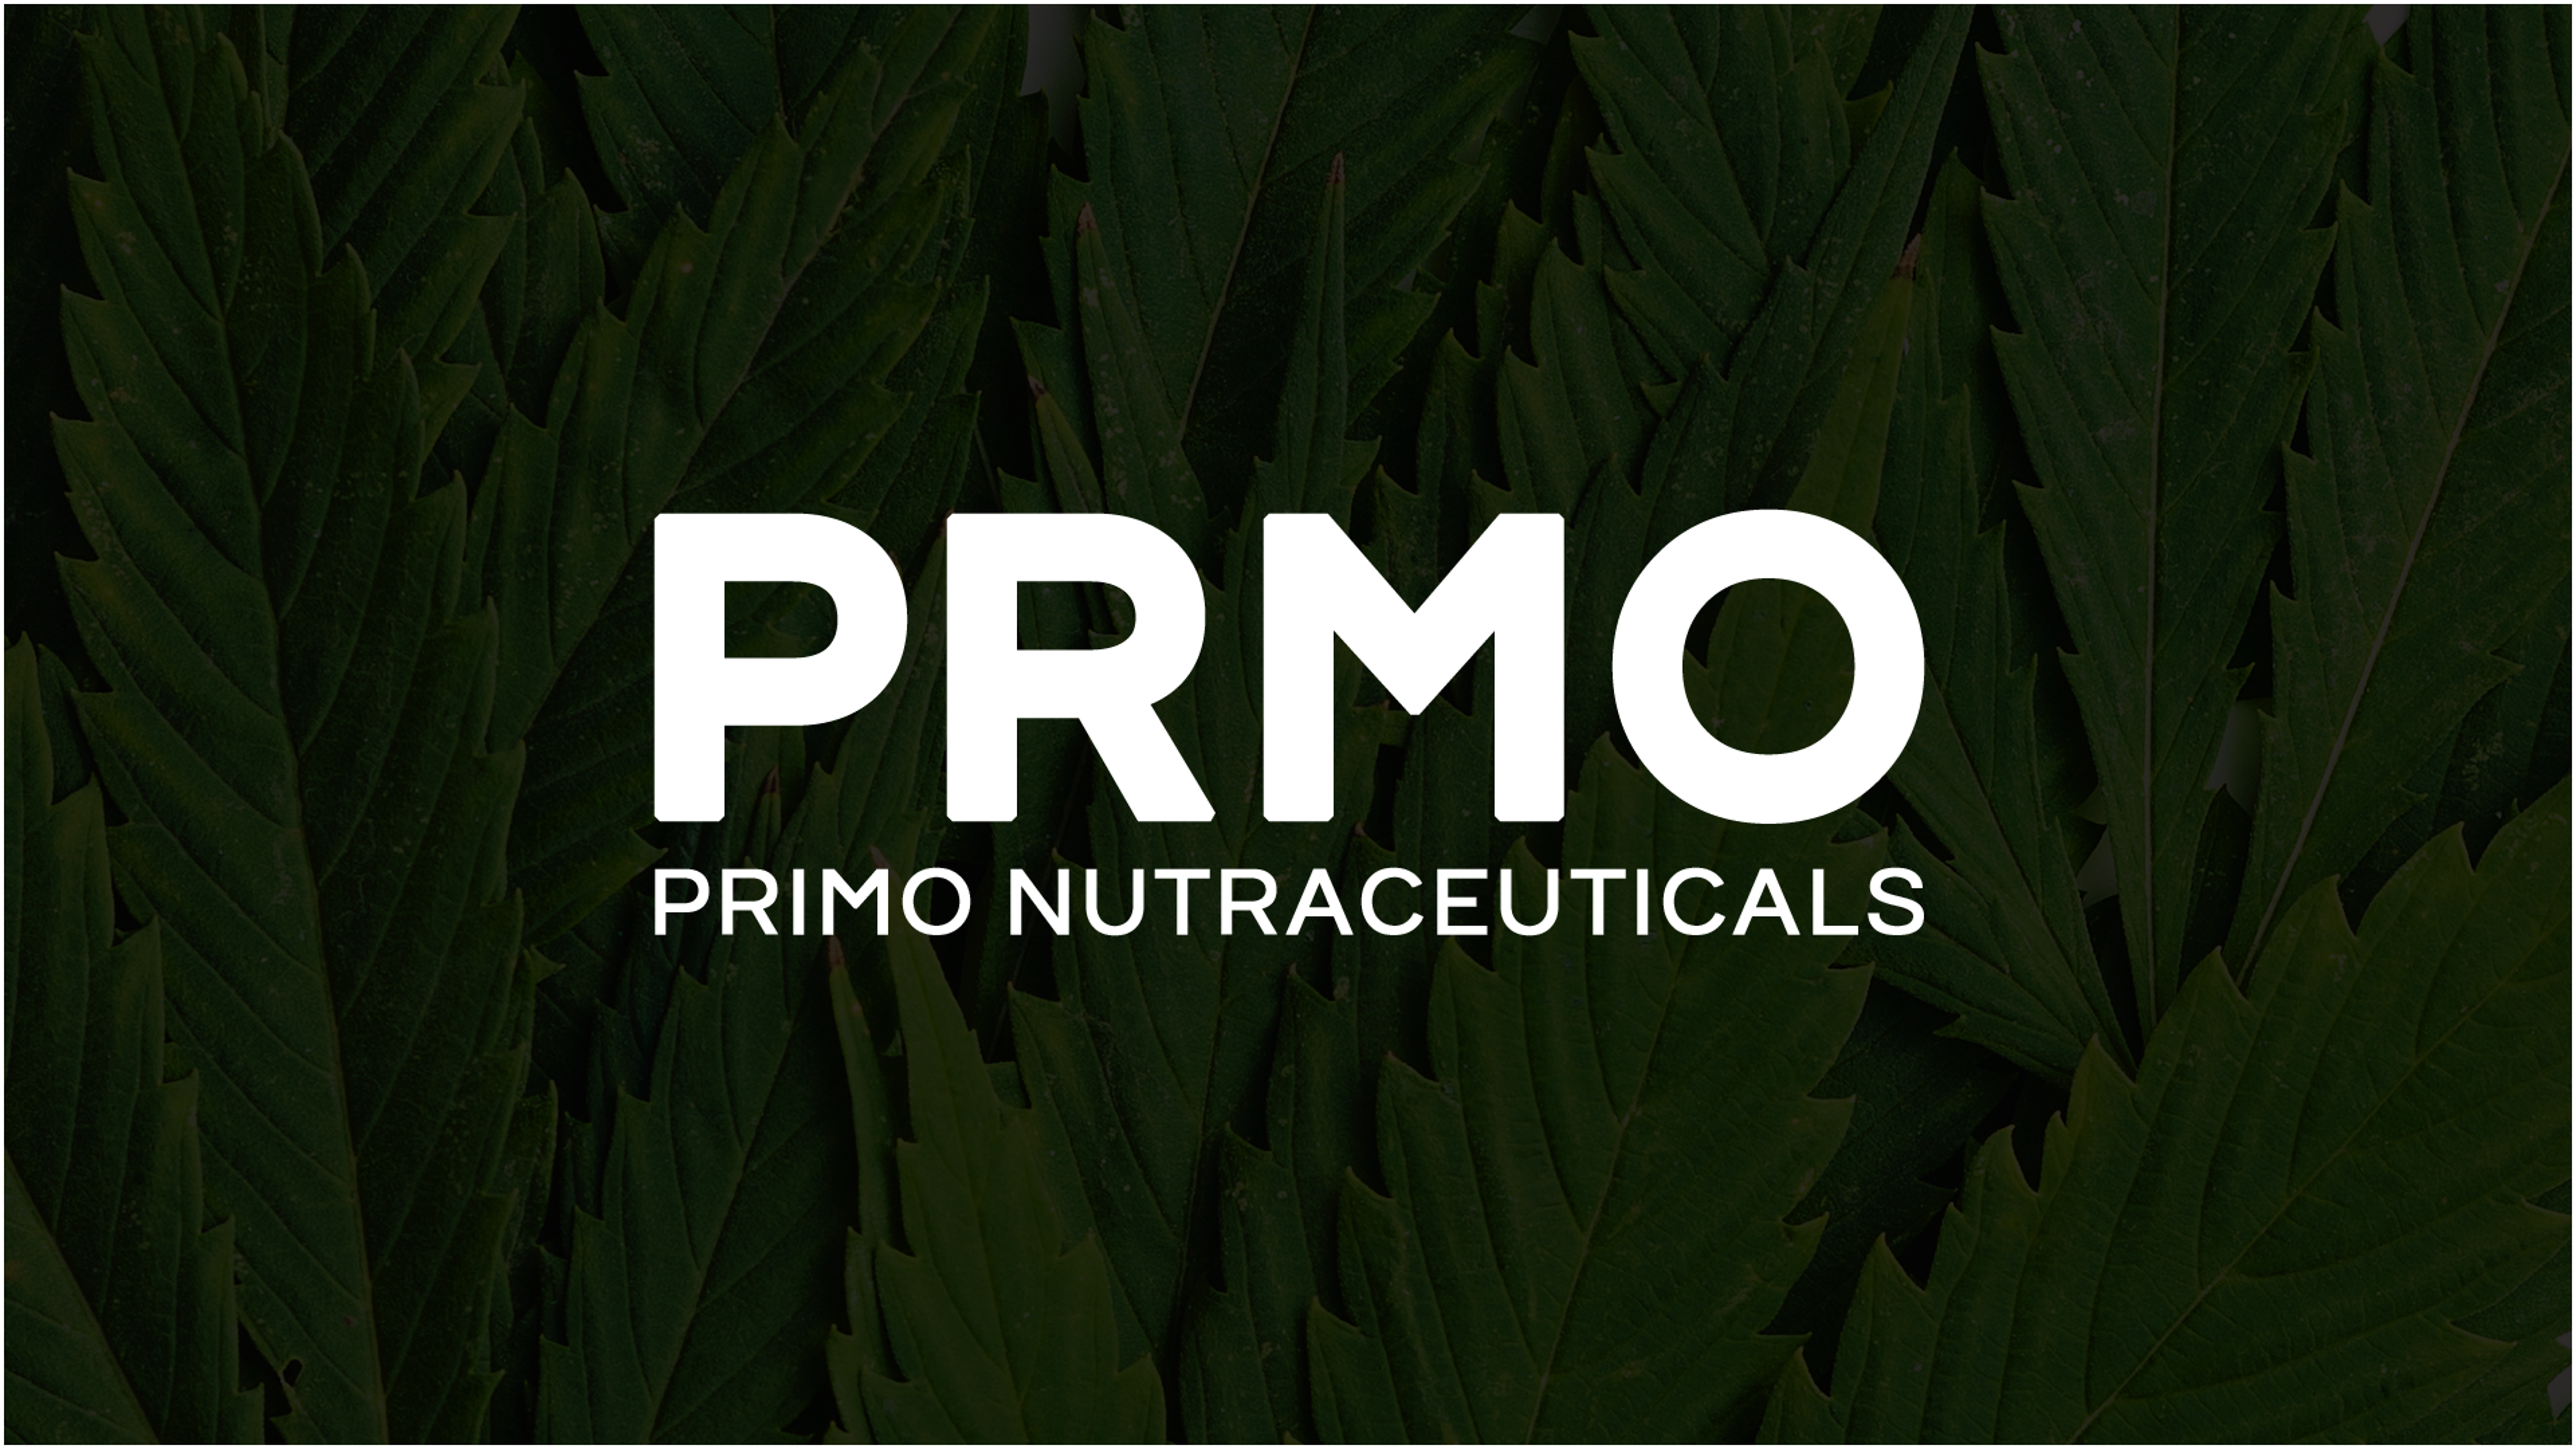 Primo Nutraceuticals Shares Rise 313% On Roller Coaster Day